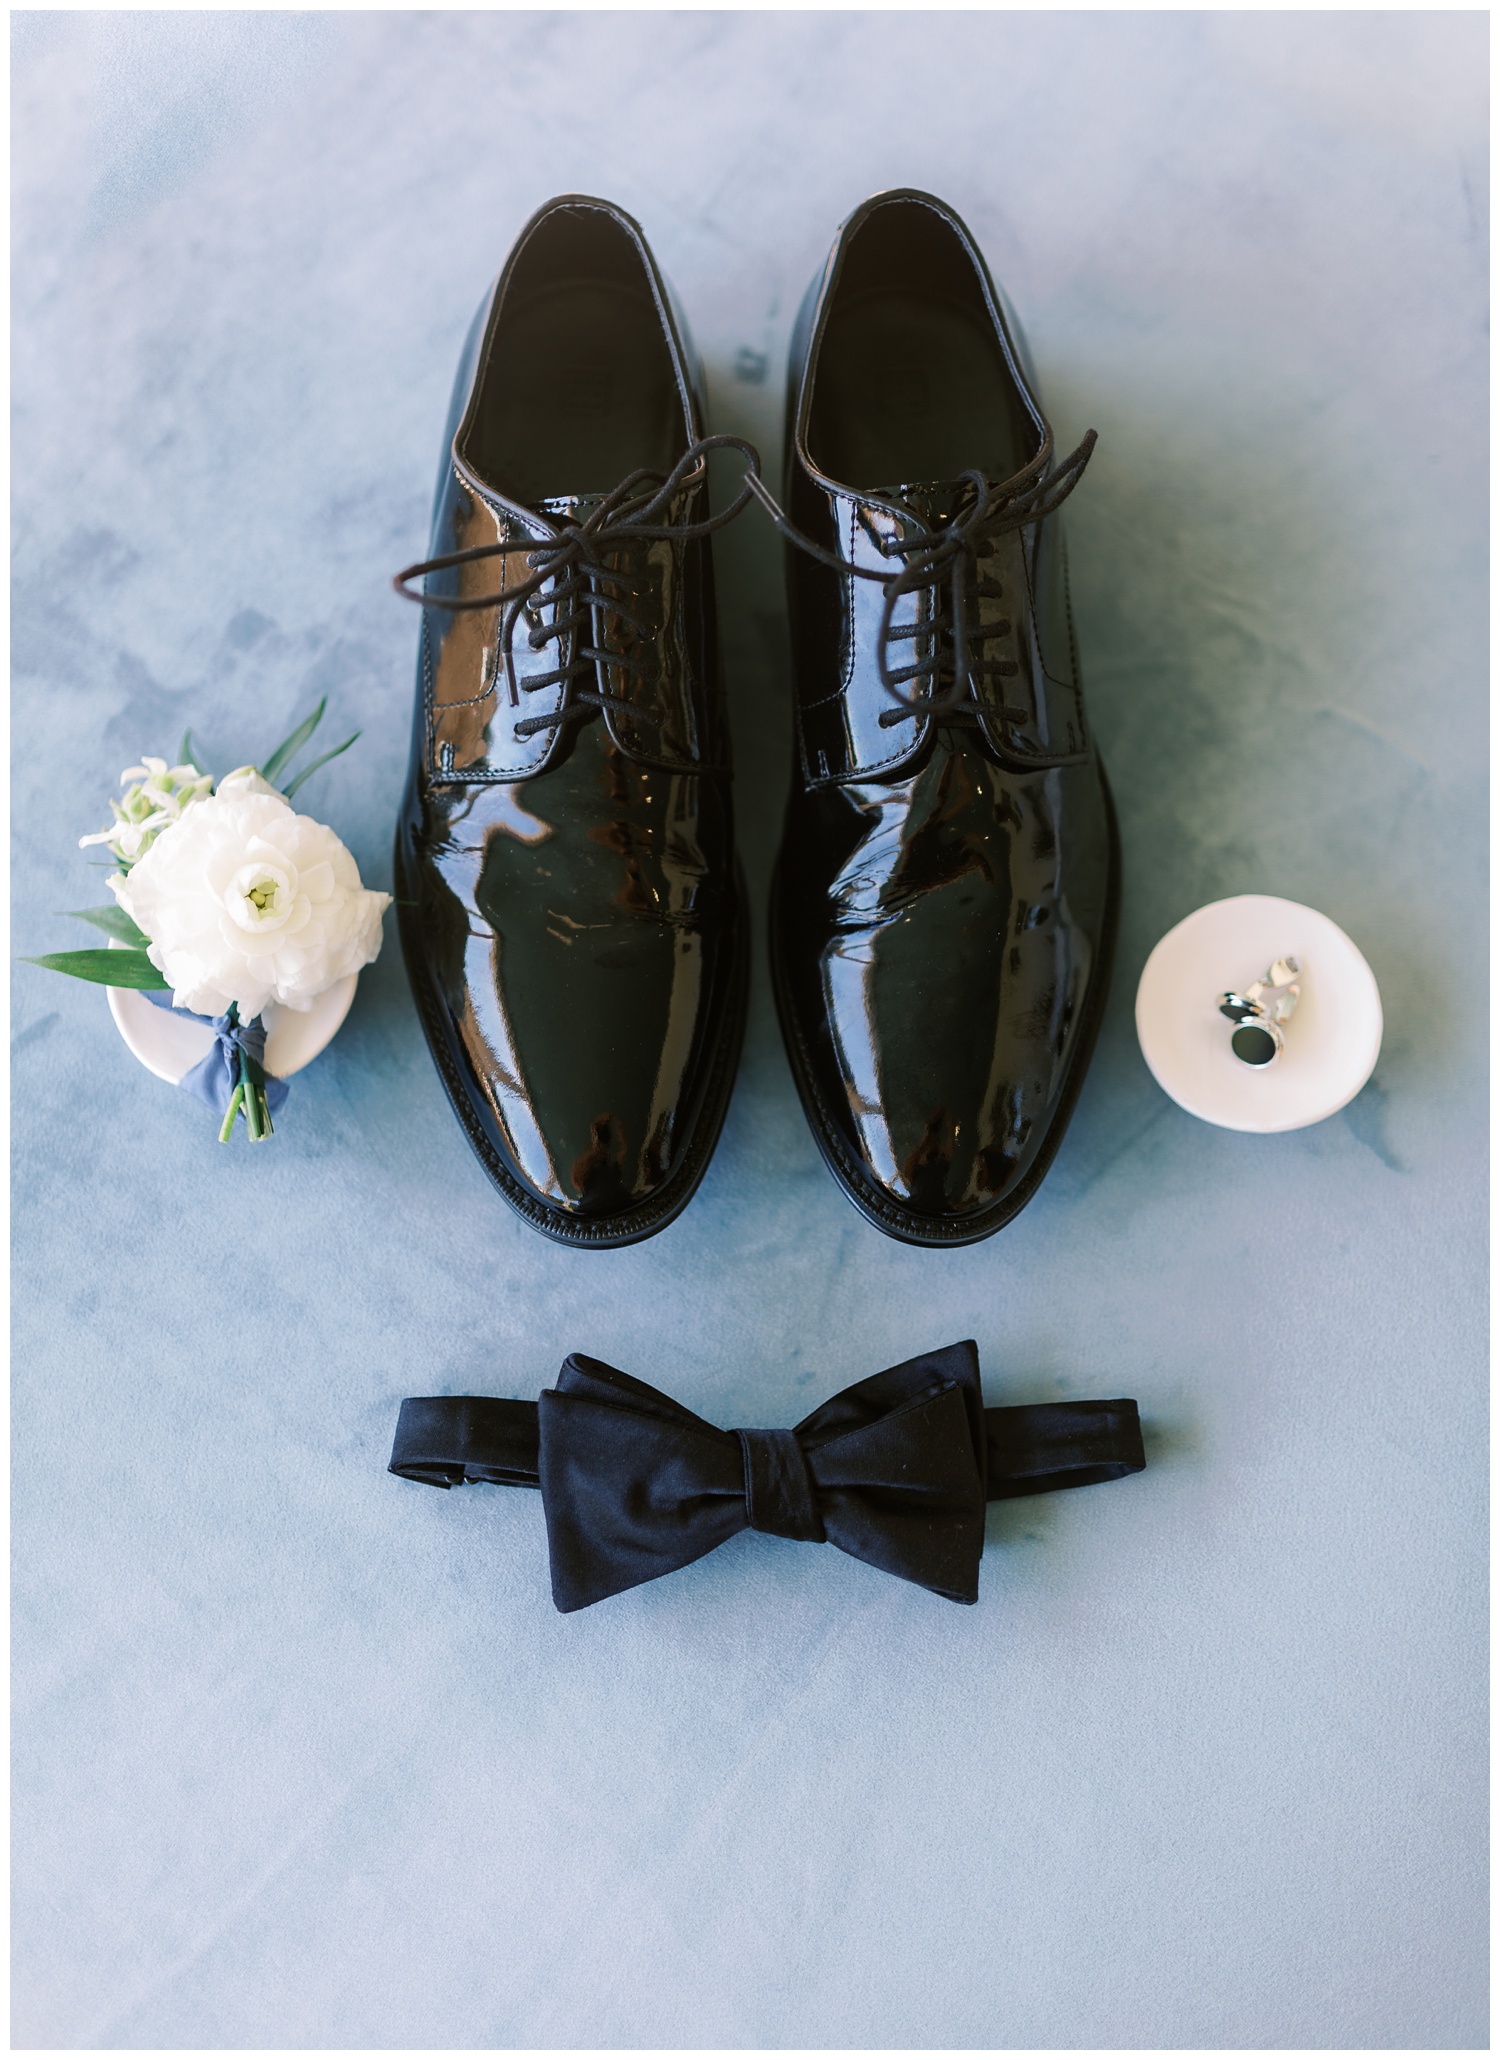 Groom details with shoes, bow tie and boutonnière